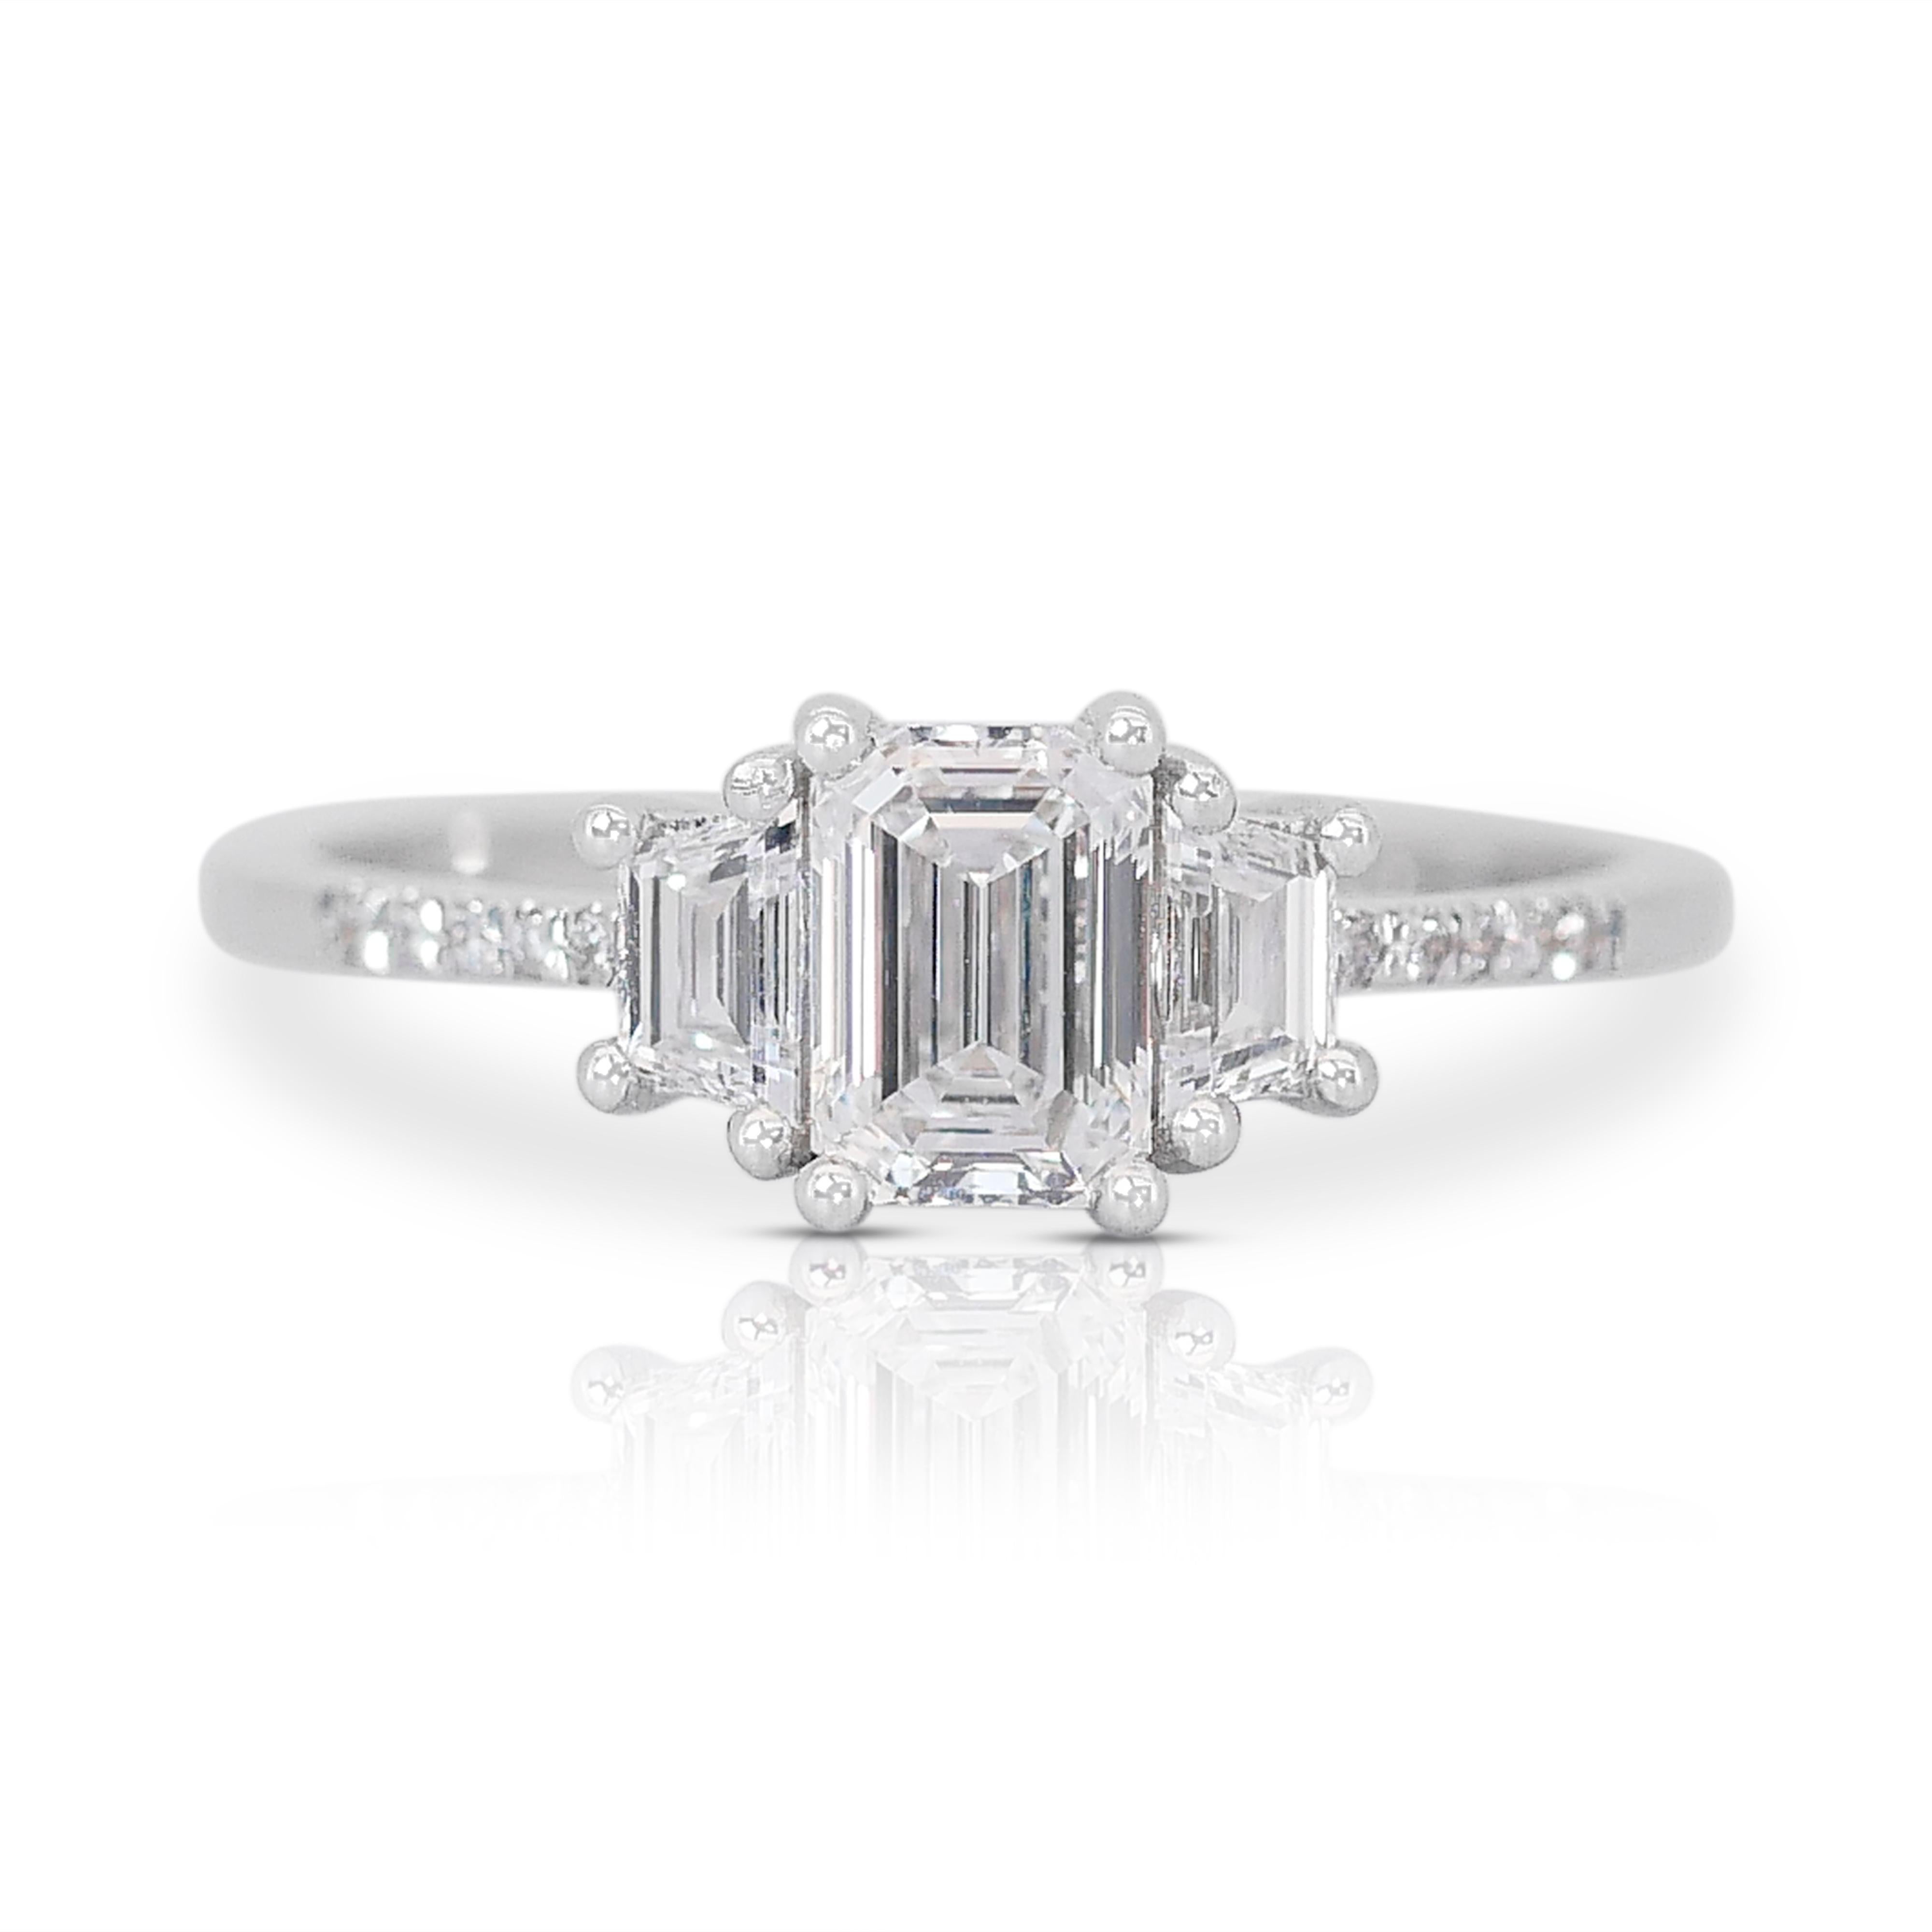 Lustrous 1.22ct Emerald-Cut Diamond 3-Stone Ring in 18K White Gold - GIA Certified

Crafted from 18k white gold, this luxurious diamond 3-stone ring showcases an emerald-cut diamond weighing 0.91-carat at its center, symbolizing exceptional